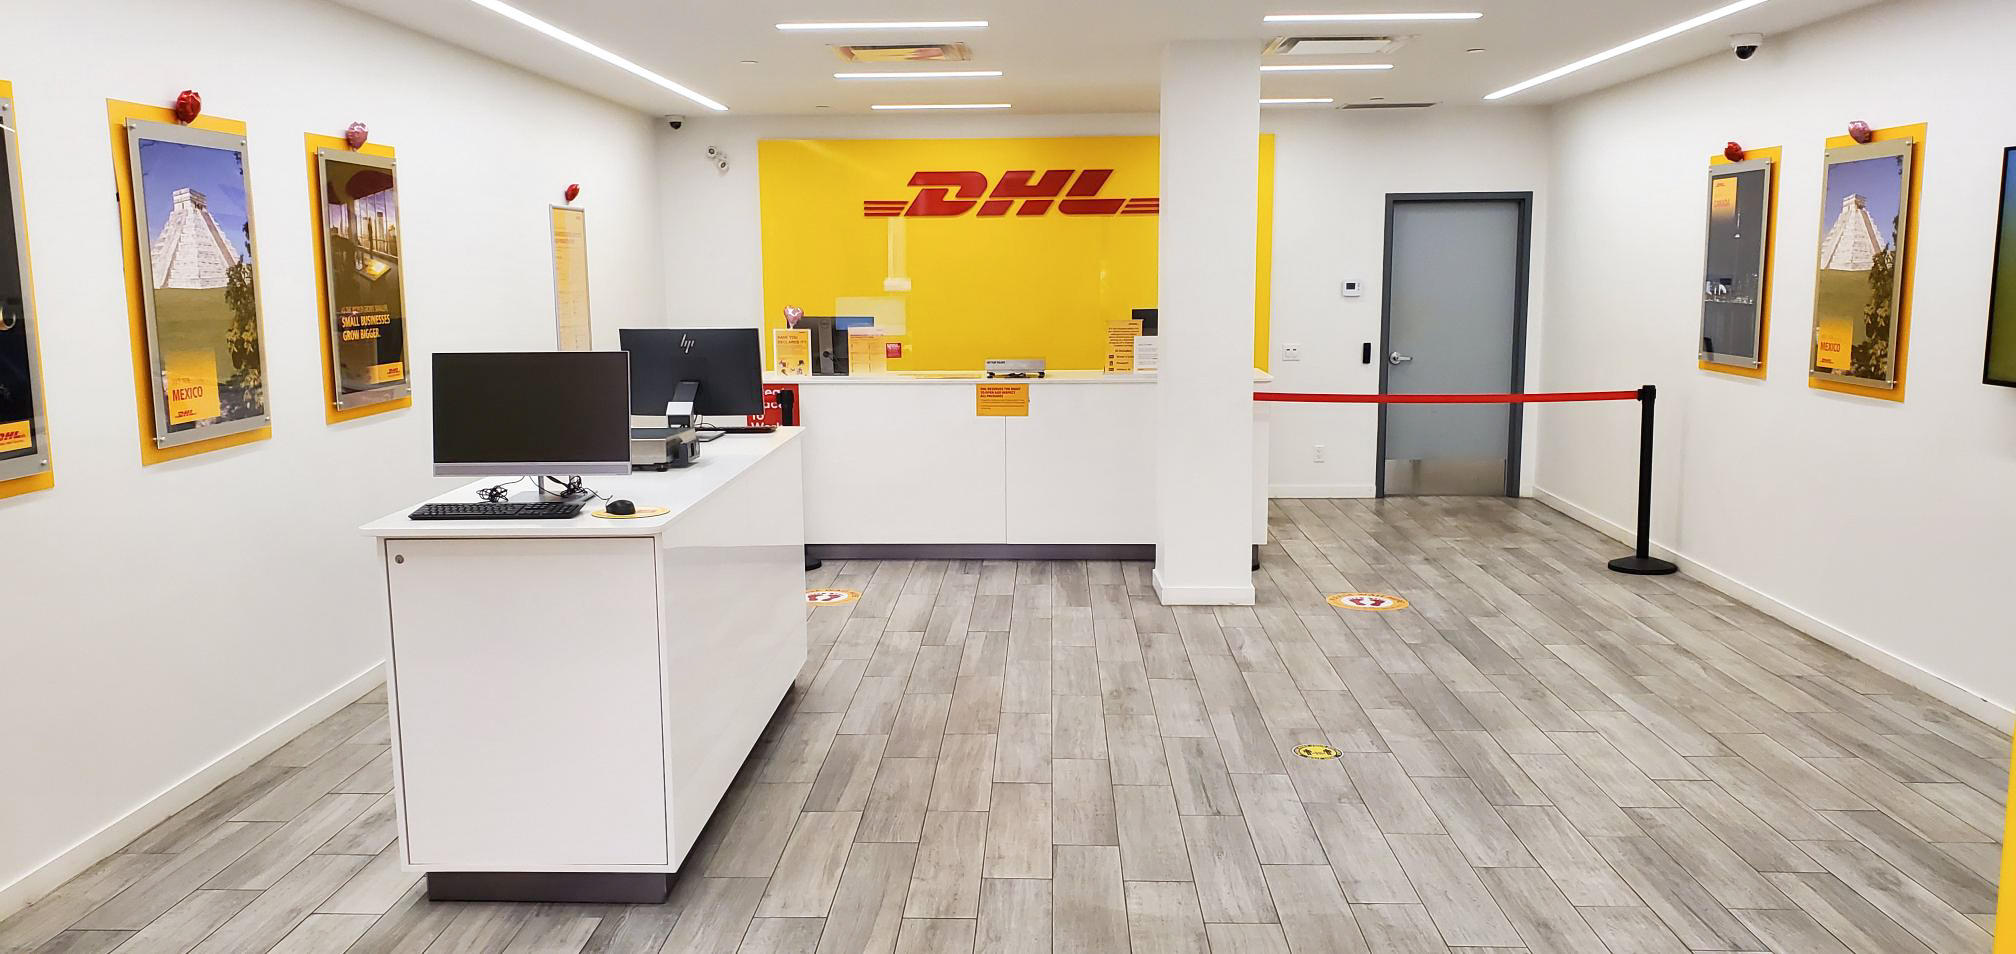 DHL Express ServicePoint Surrey (855)345-7447